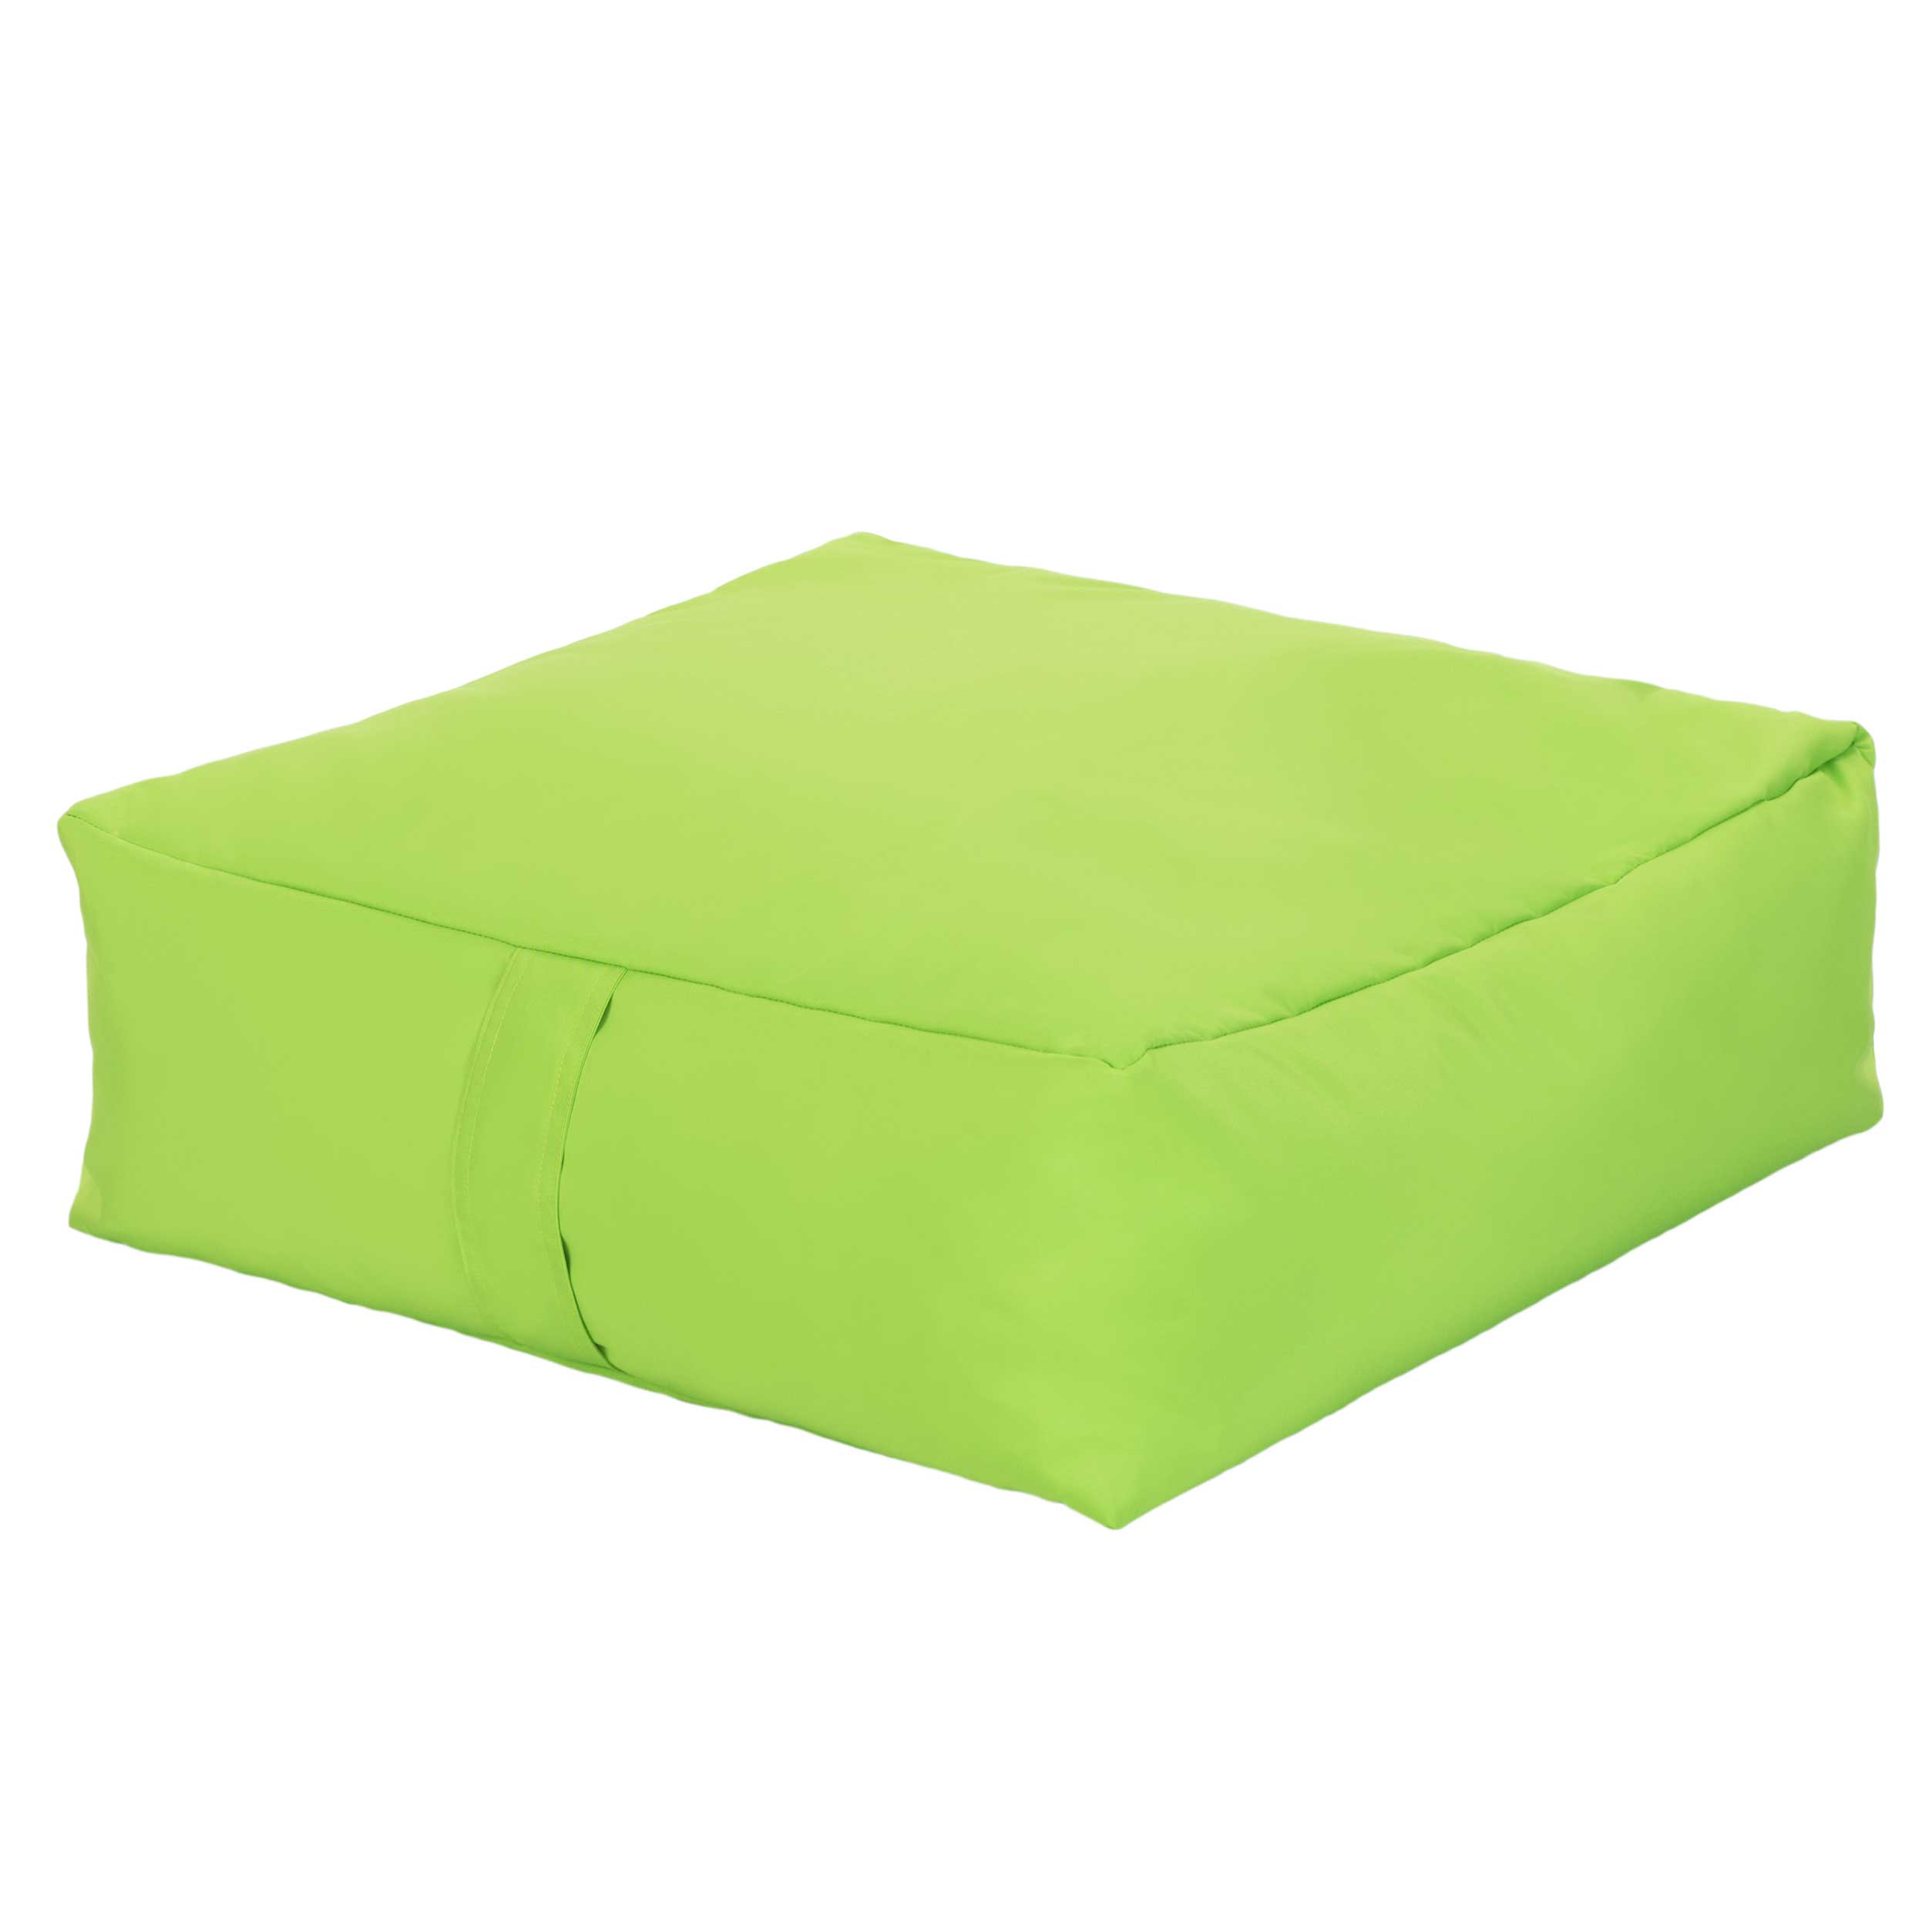 Water Resistant Soft Floor Cushions